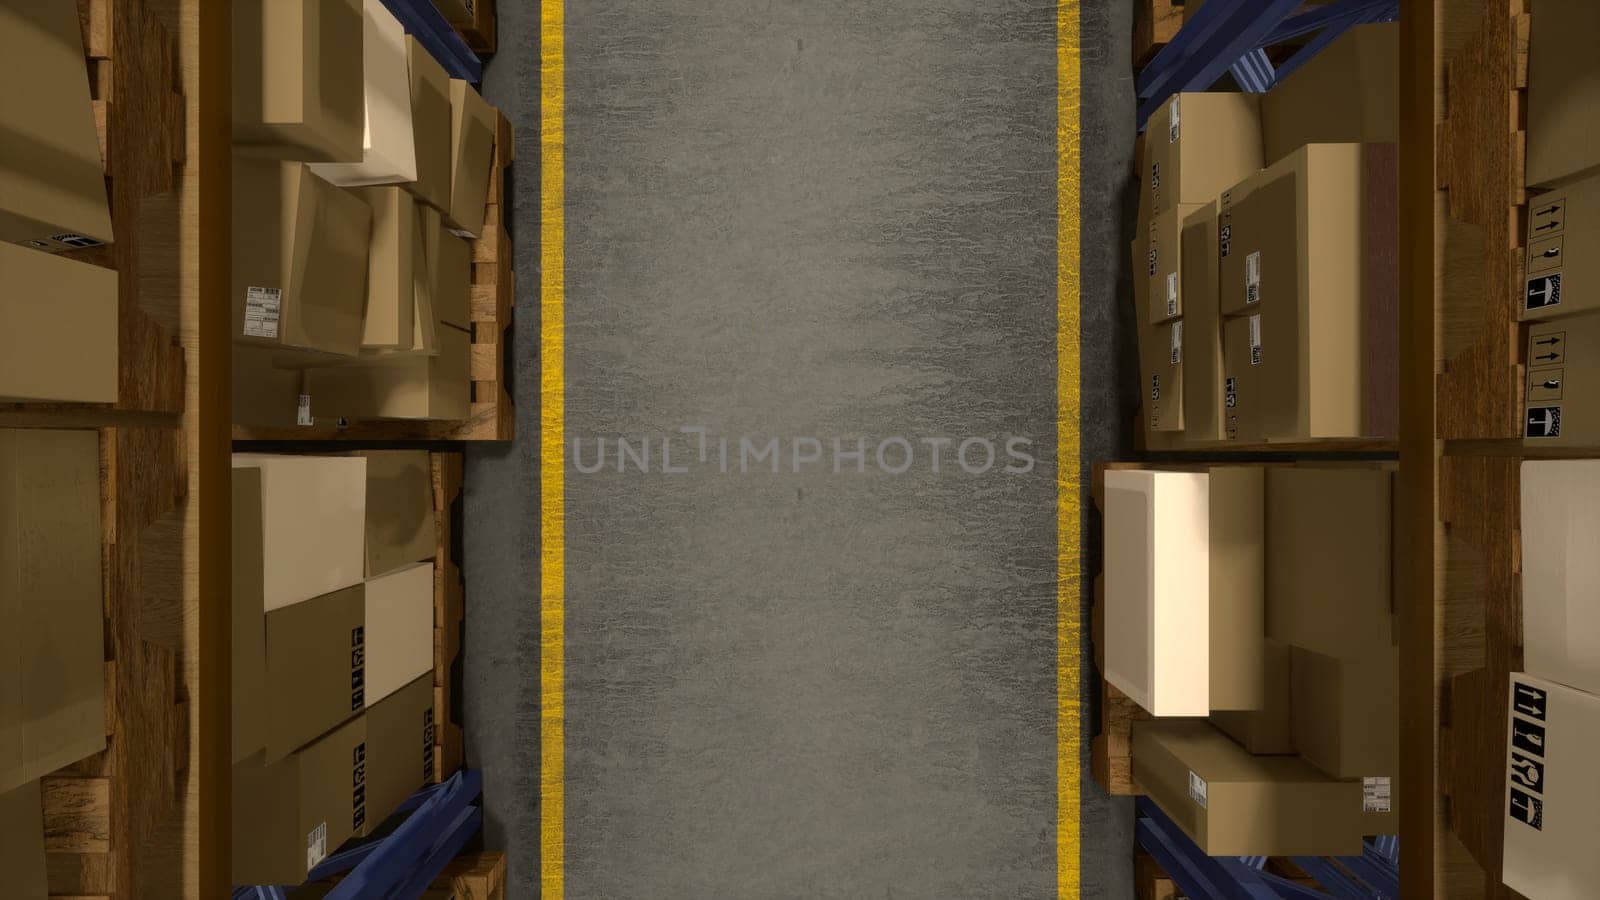 Massive storage center storing wholesale boxes with order labels, retail products on metal racks. Warehouse managing shipments with commerce import export system. 3d render animation.